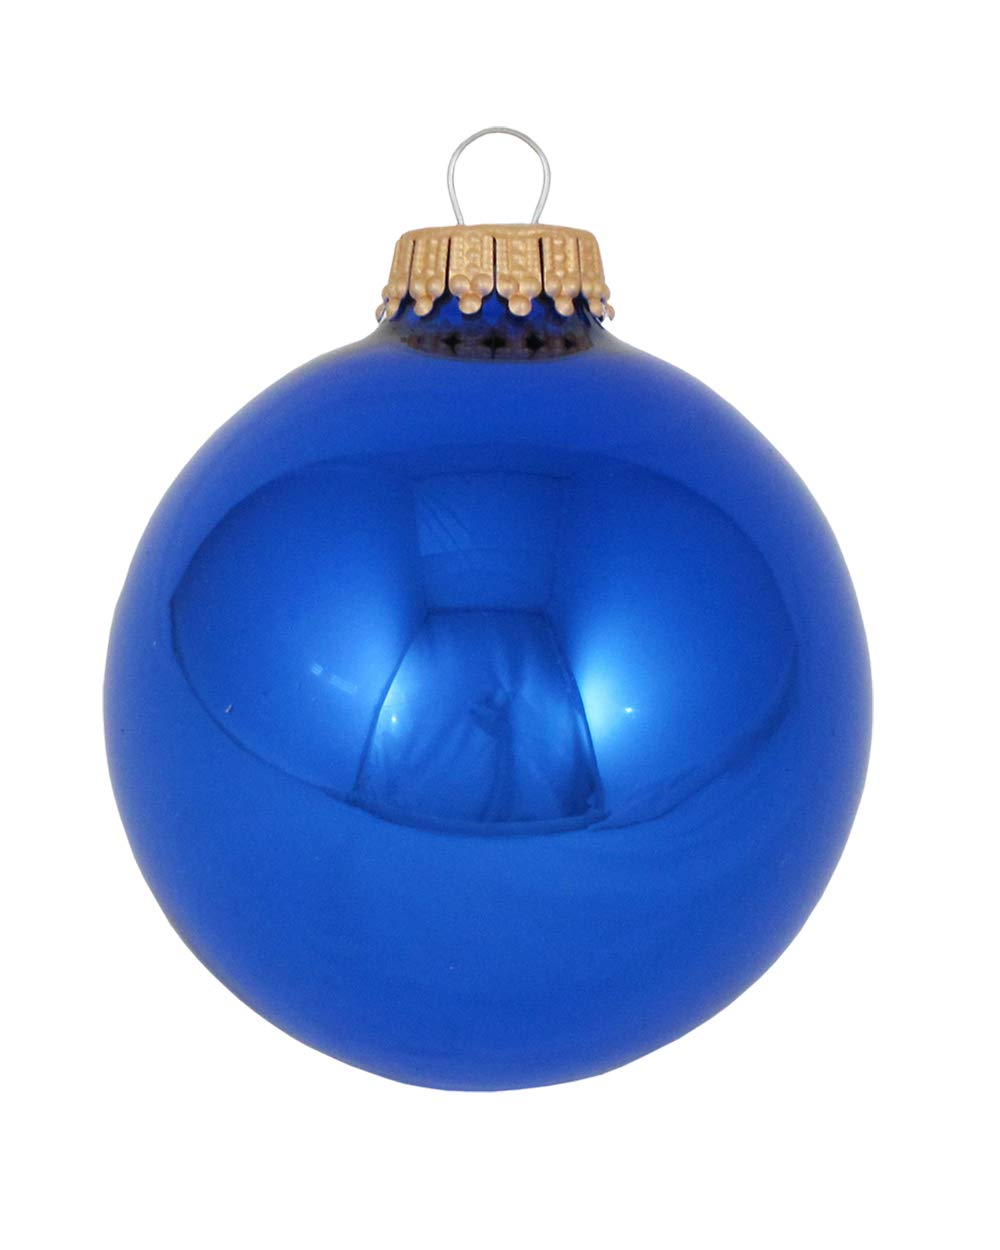 Glass Christmas Tree Ornaments - 67mm / 2.63" [8 Pieces] Designer Balls from Christmas By Krebs Seamless Hanging Holiday Decor (Shiny Victoria Blue)